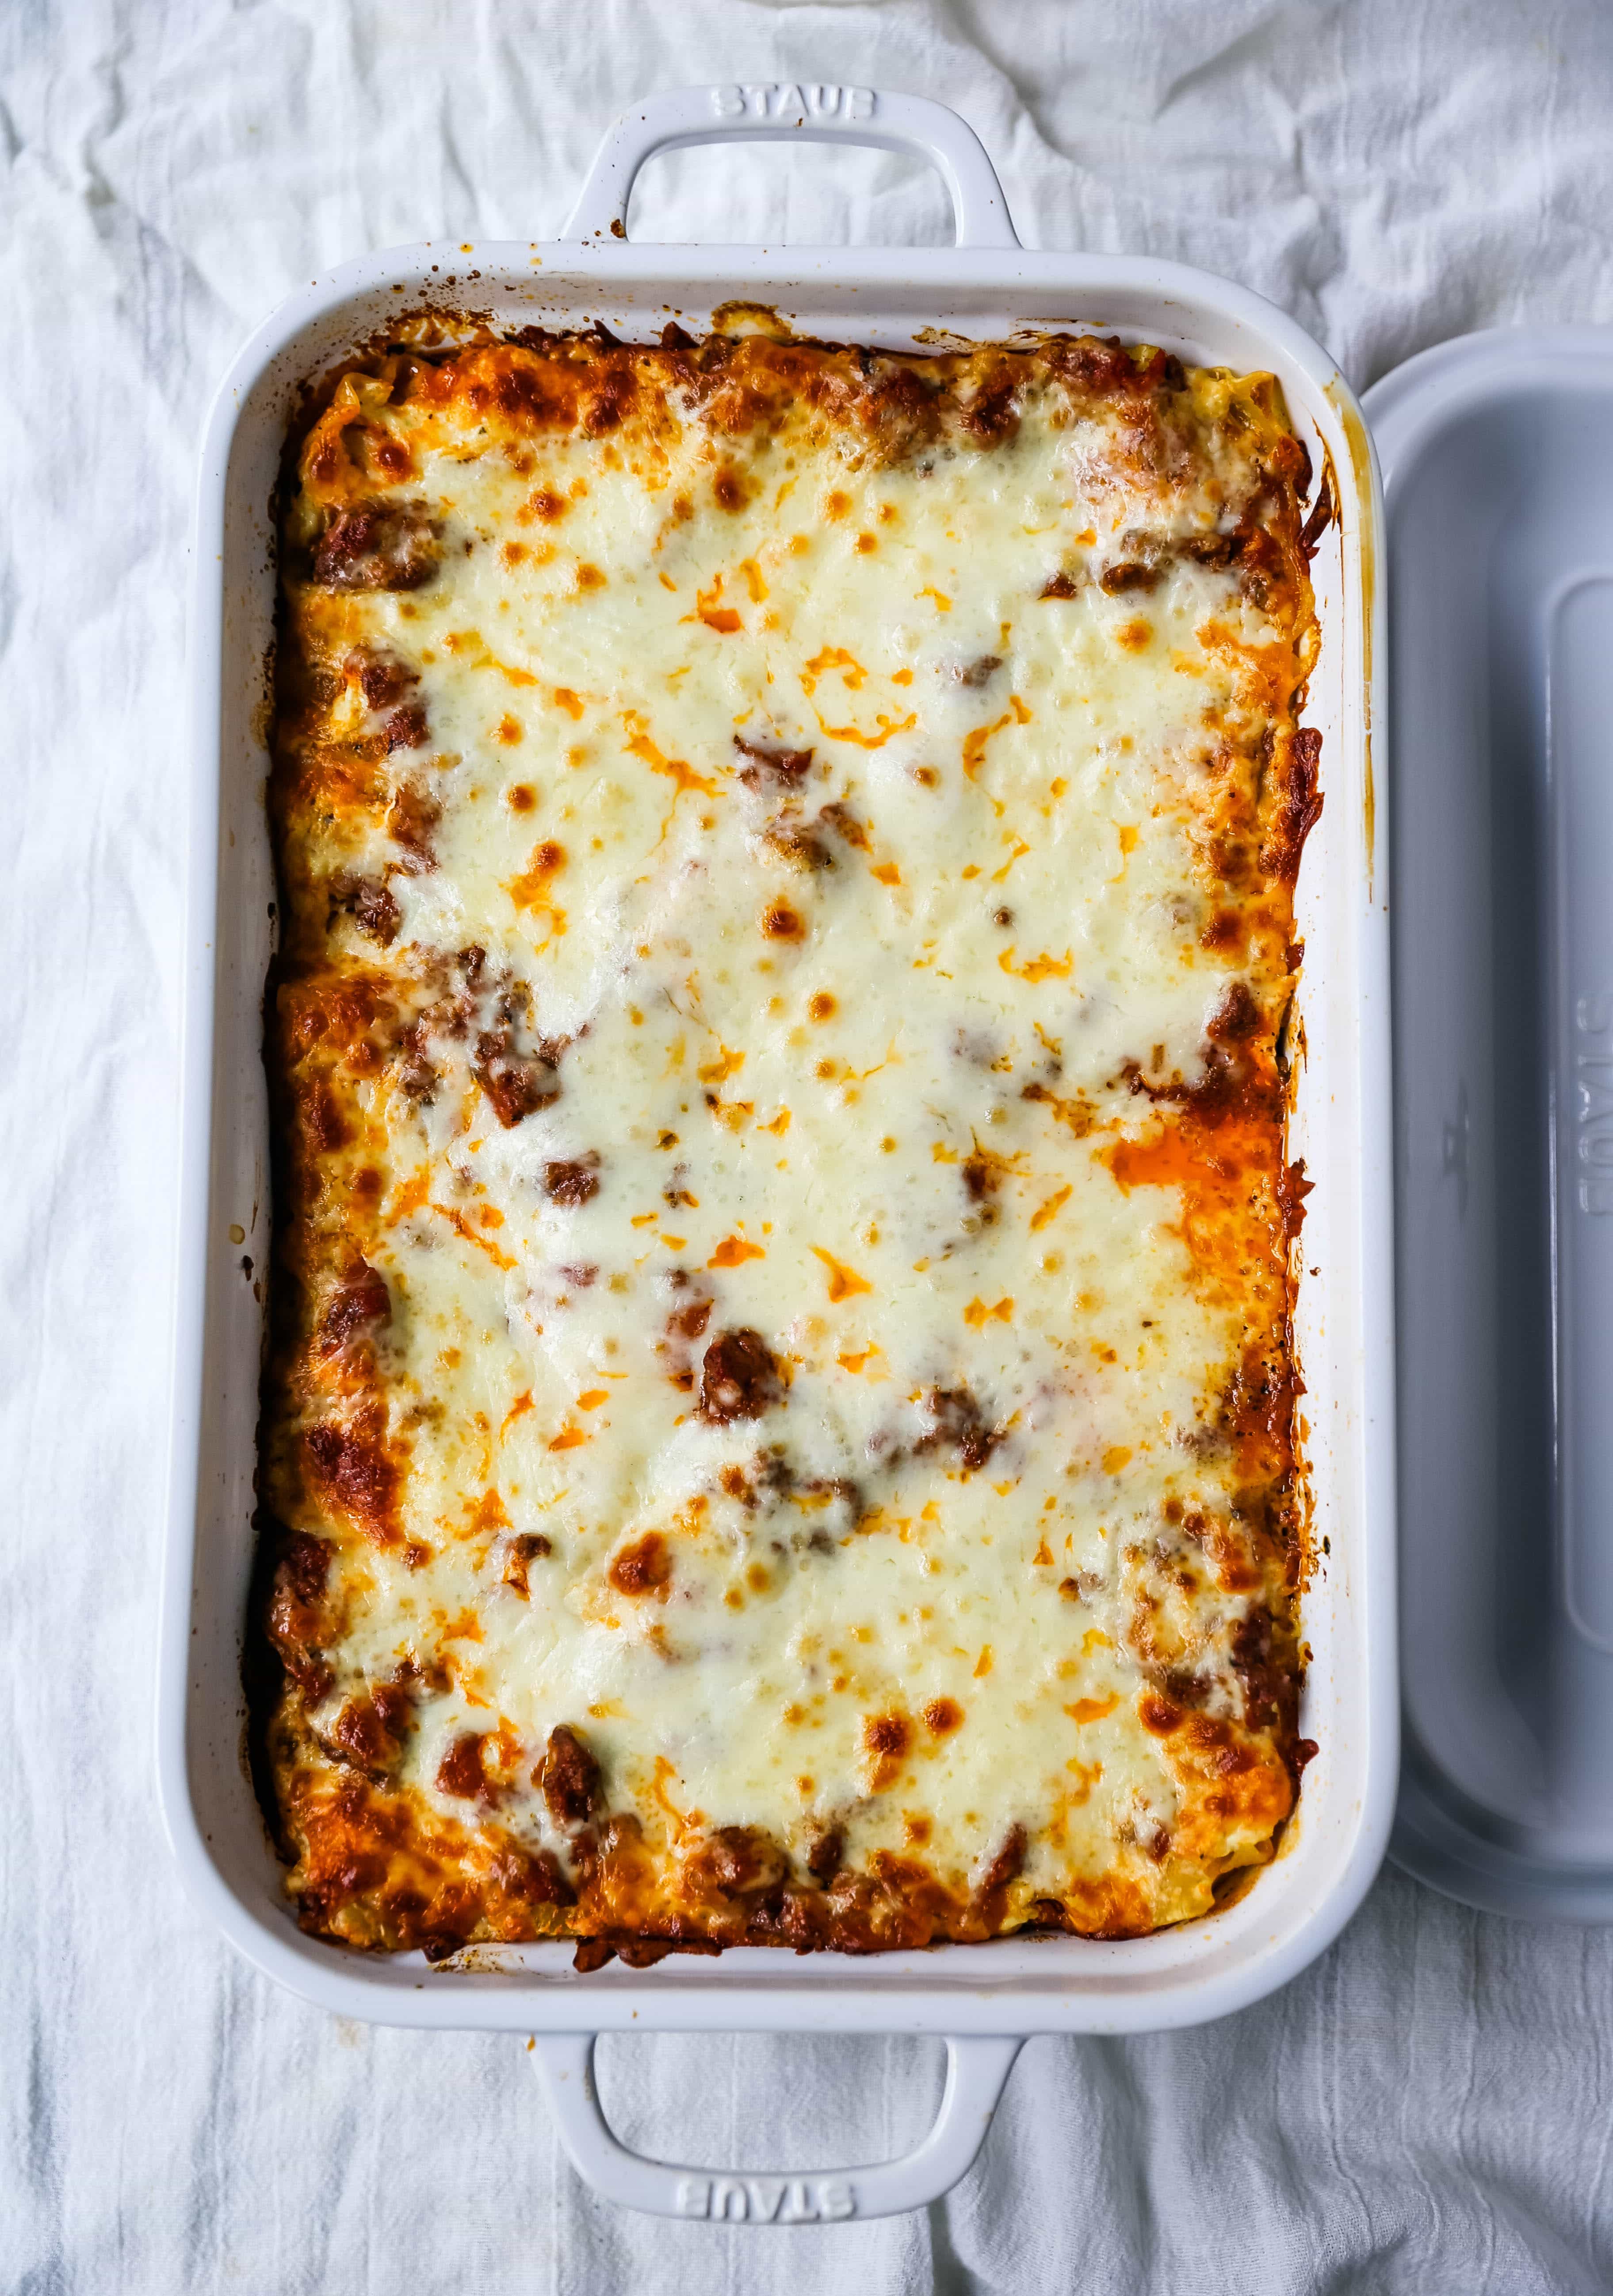 Classic Lasagna Recipe The perfect lasagna recipe made with parmesan ricotta cheese filling, melted mozzarella cheese, lasagna noodles, and a robust tomato meat sauce. It is the best lasagna recipe!